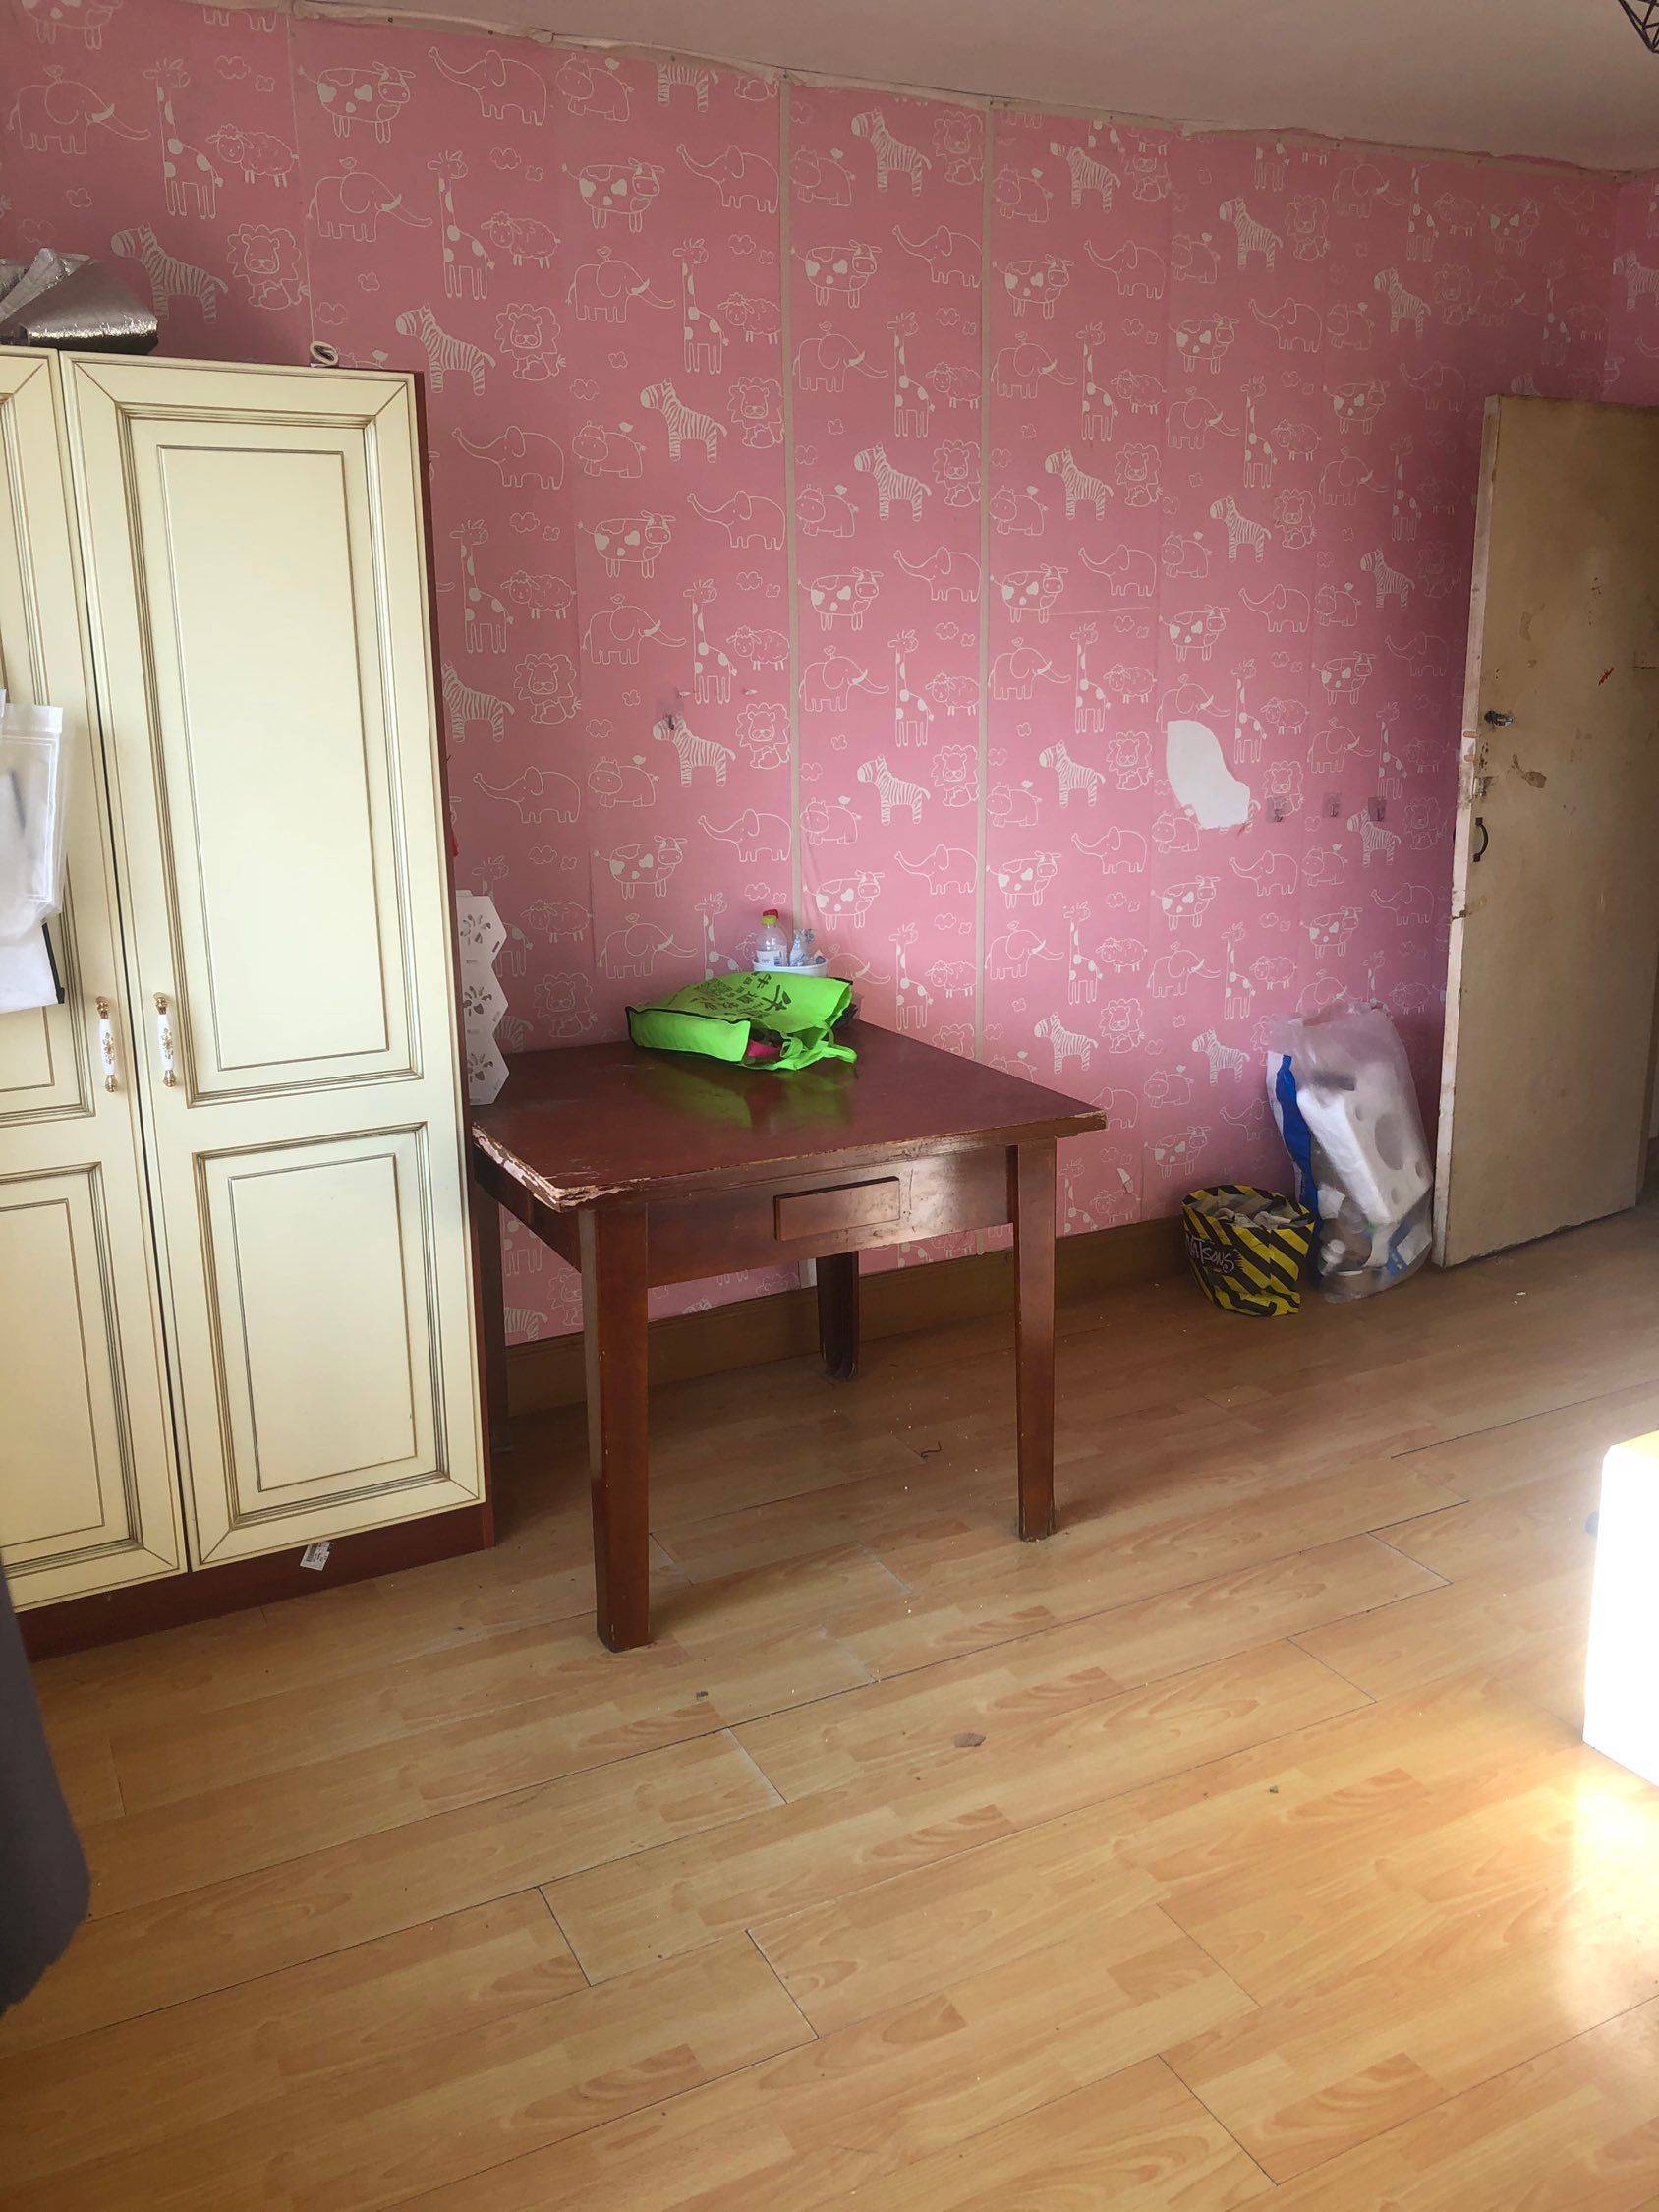 Qingdao-Shibei-Cozy Home,Clean&Comfy,No Gender Limit,Chilled